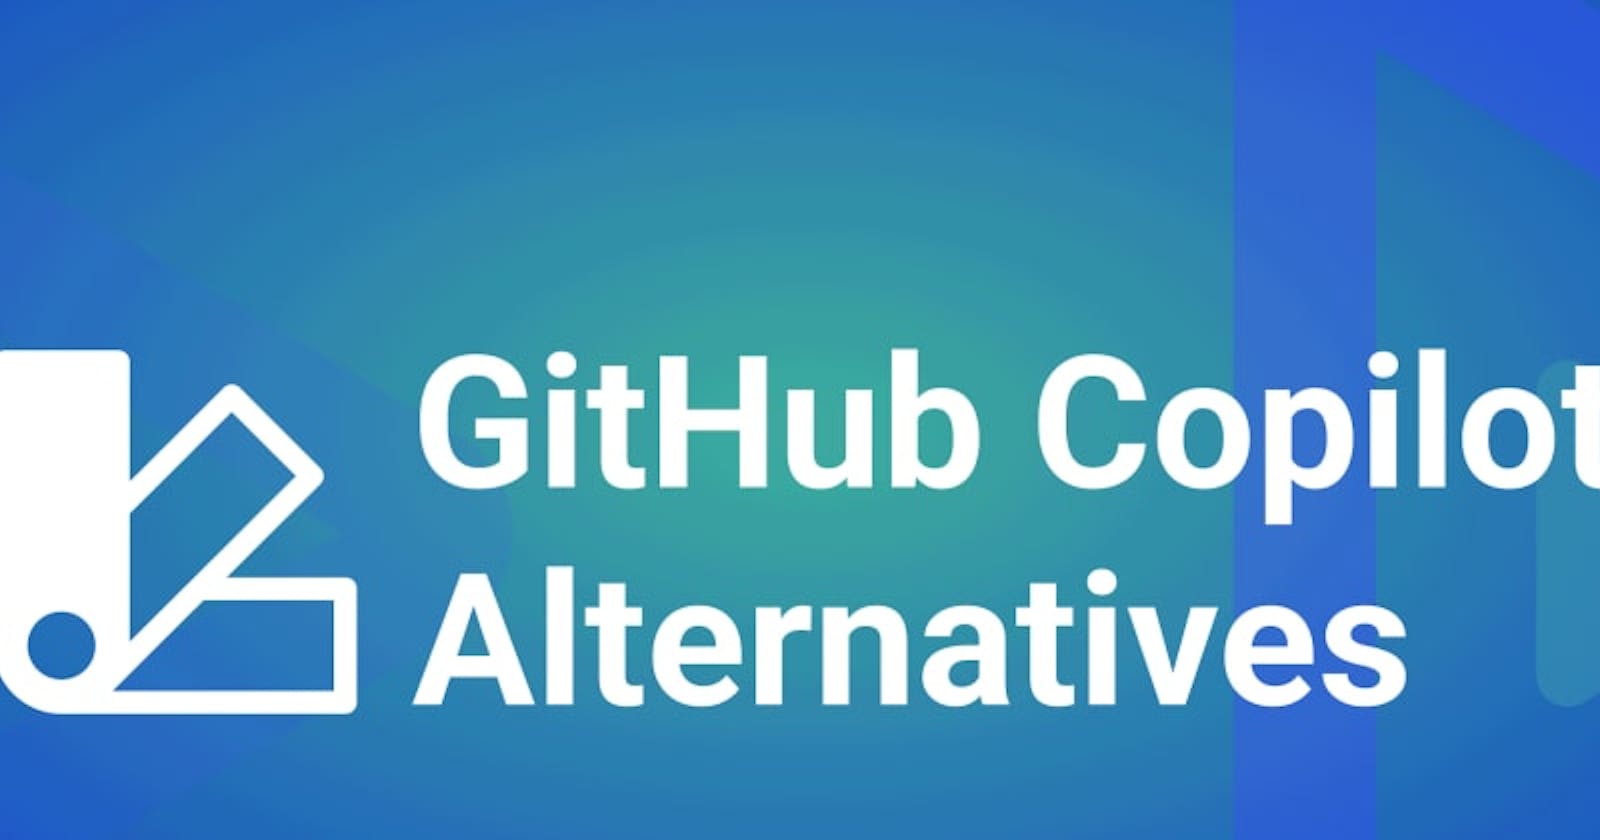 3 alternatives to GitHub Copilot to keep an eye out for